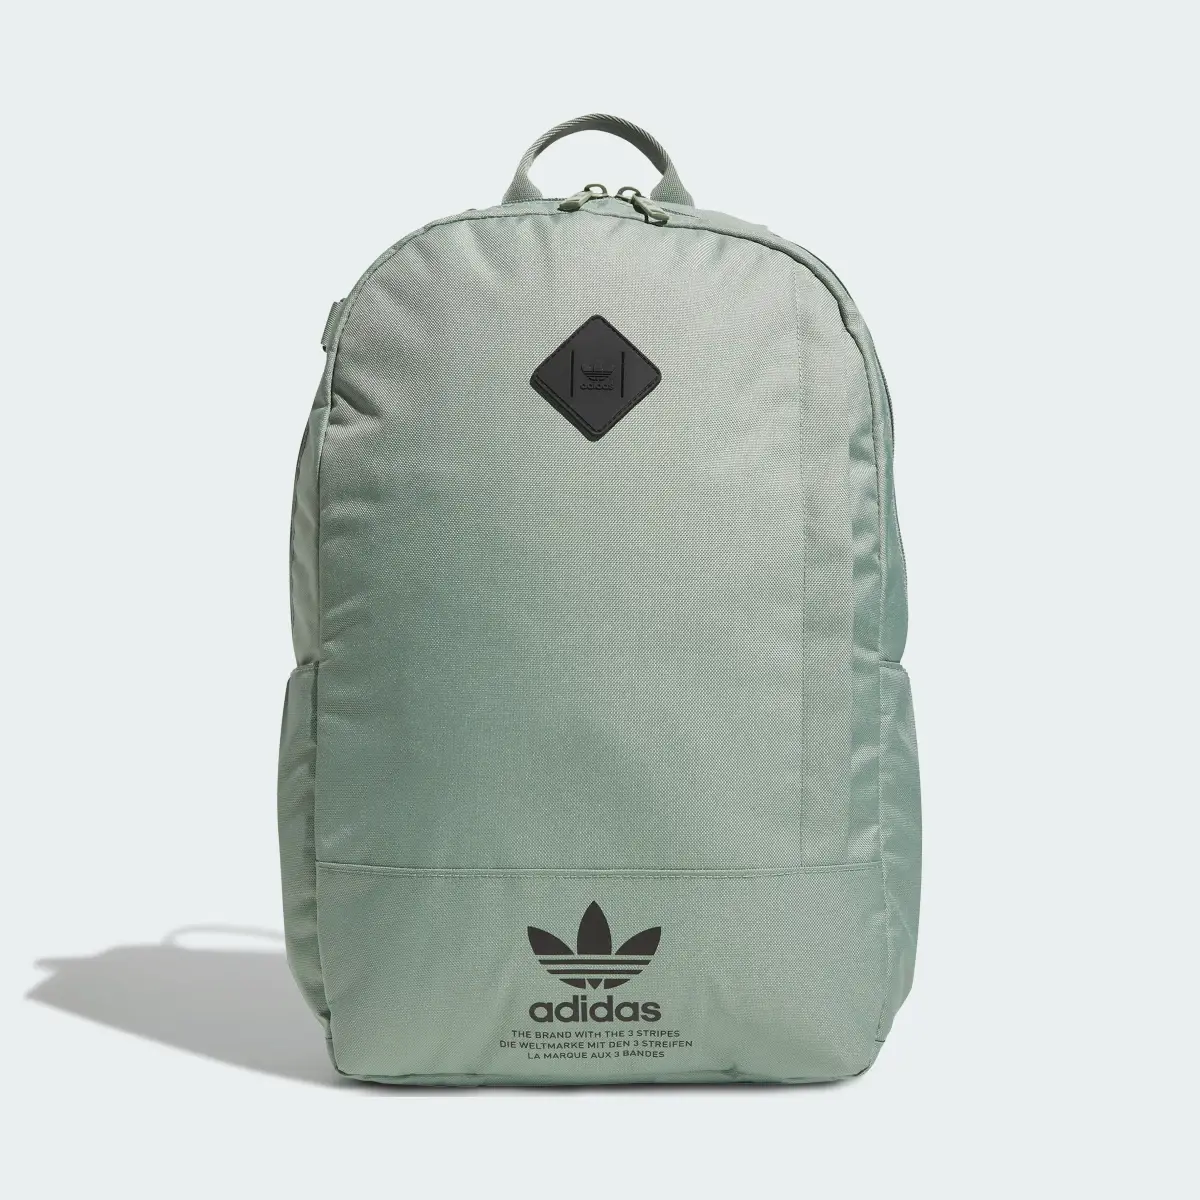 Adidas Graphic Backpack. 2